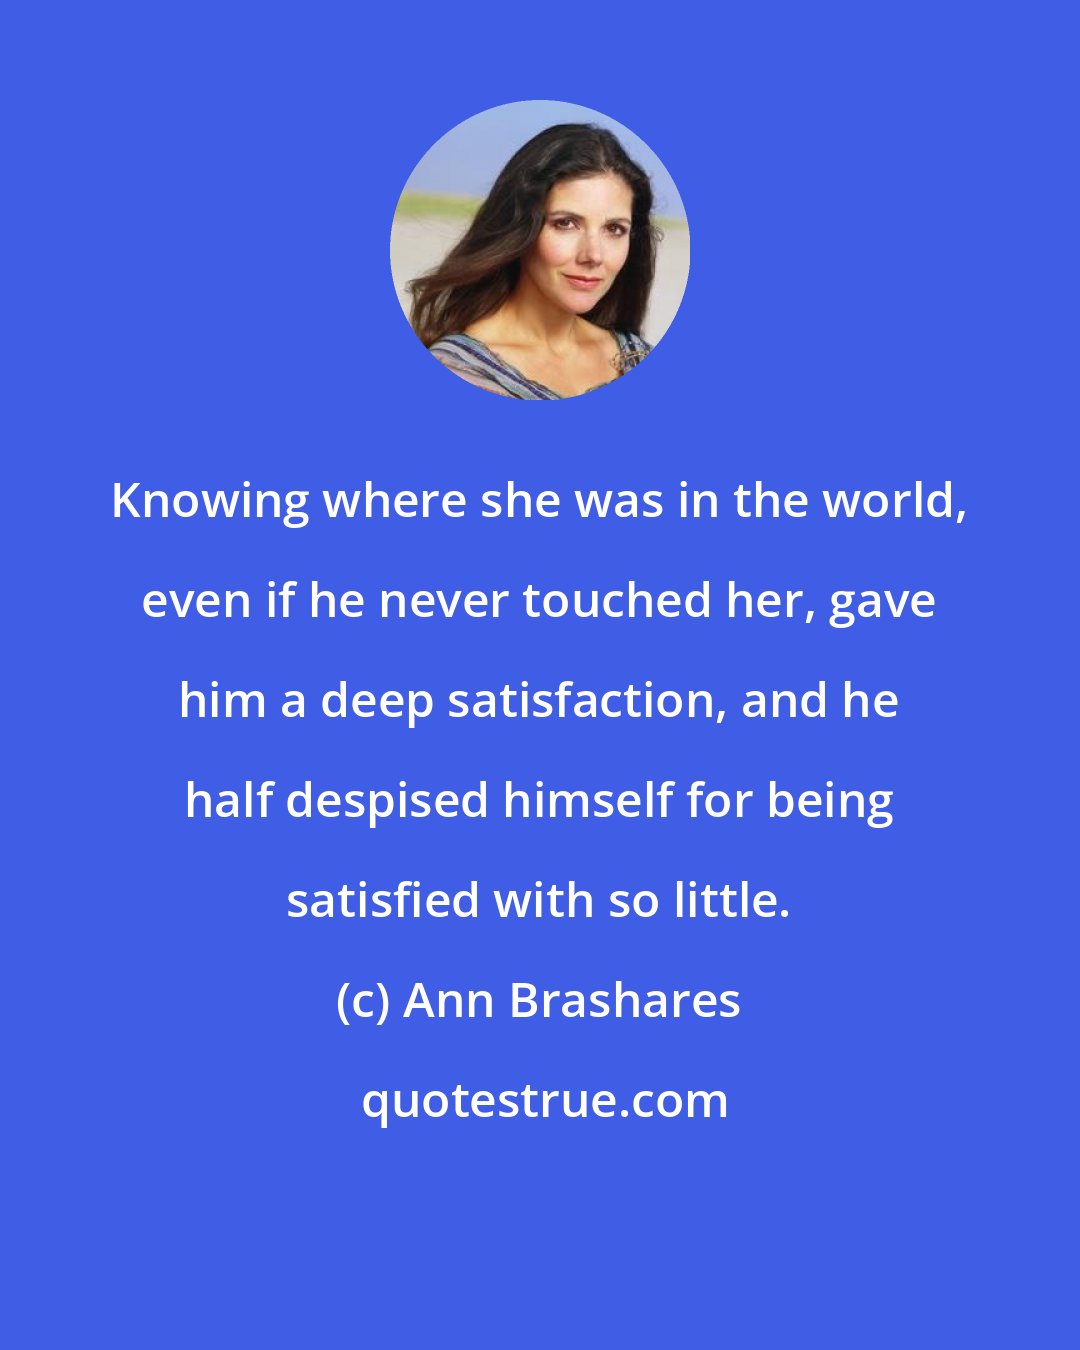 Ann Brashares: Knowing where she was in the world, even if he never touched her, gave him a deep satisfaction, and he half despised himself for being satisfied with so little.